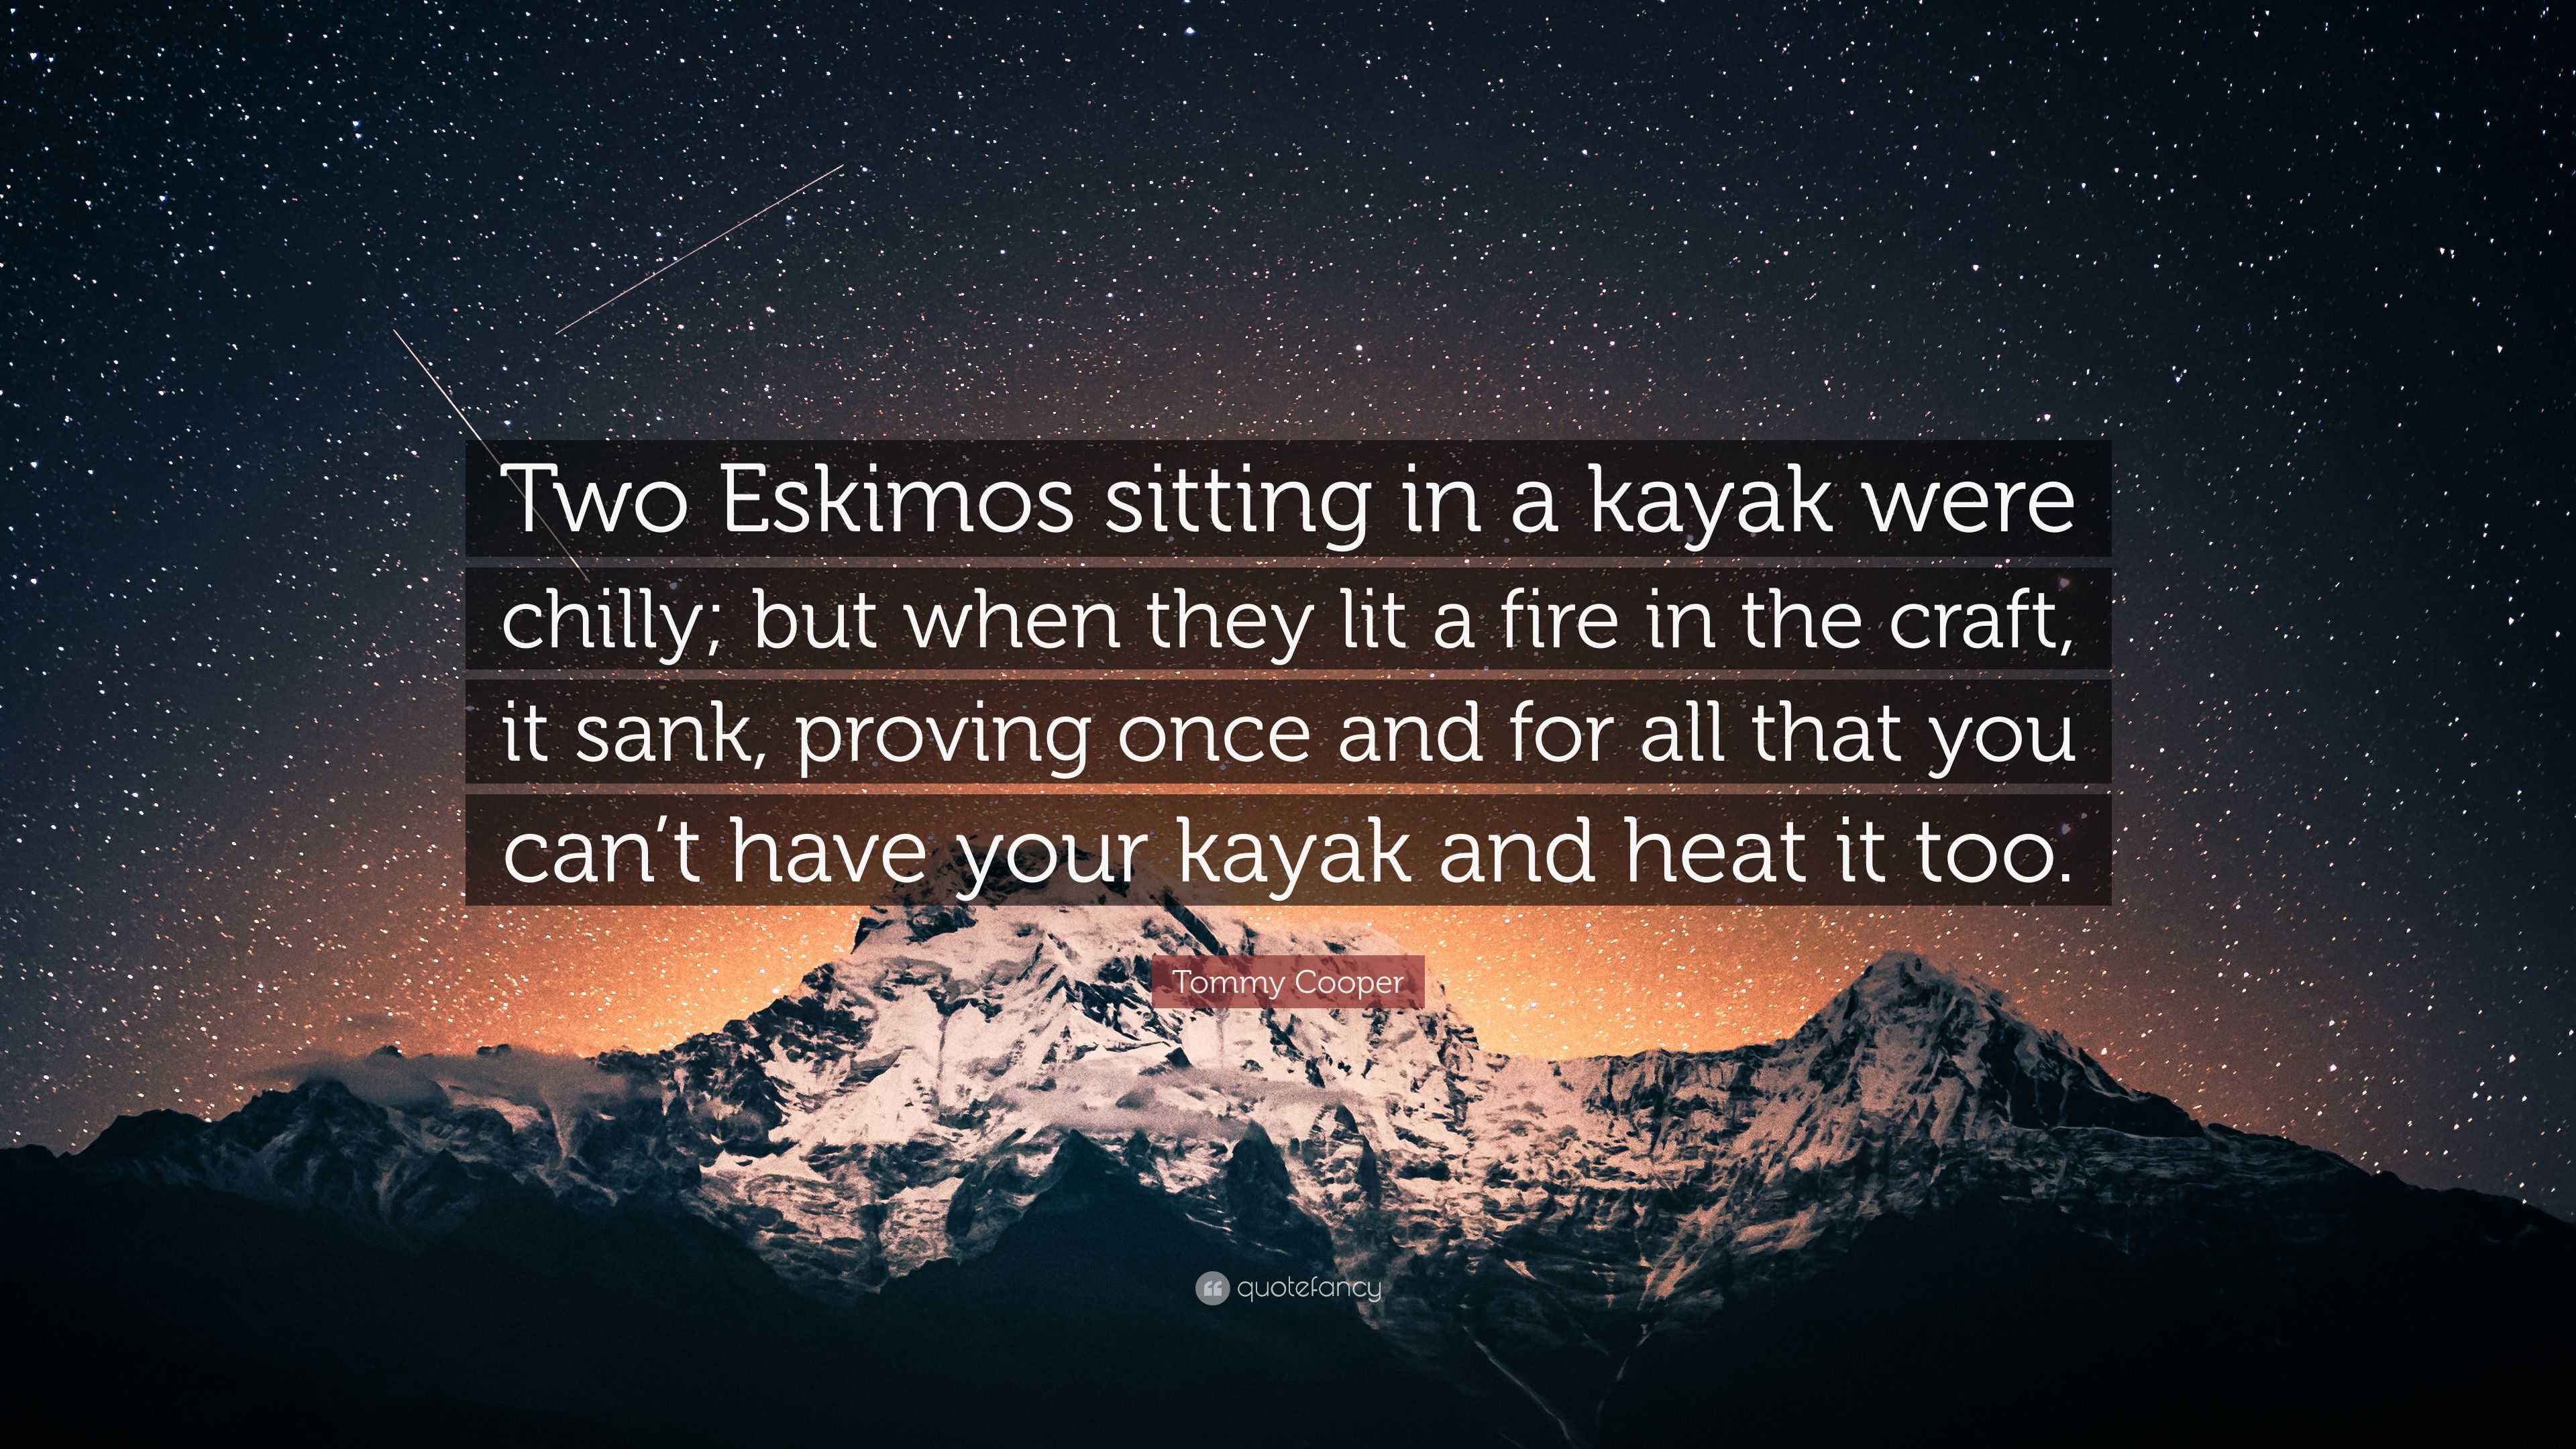 Image result for Two Eskimos sitting in a kayak were chilly. They lit a fire in the craft, it sank. Proving once and for all that you can't have your kayak and heat it.